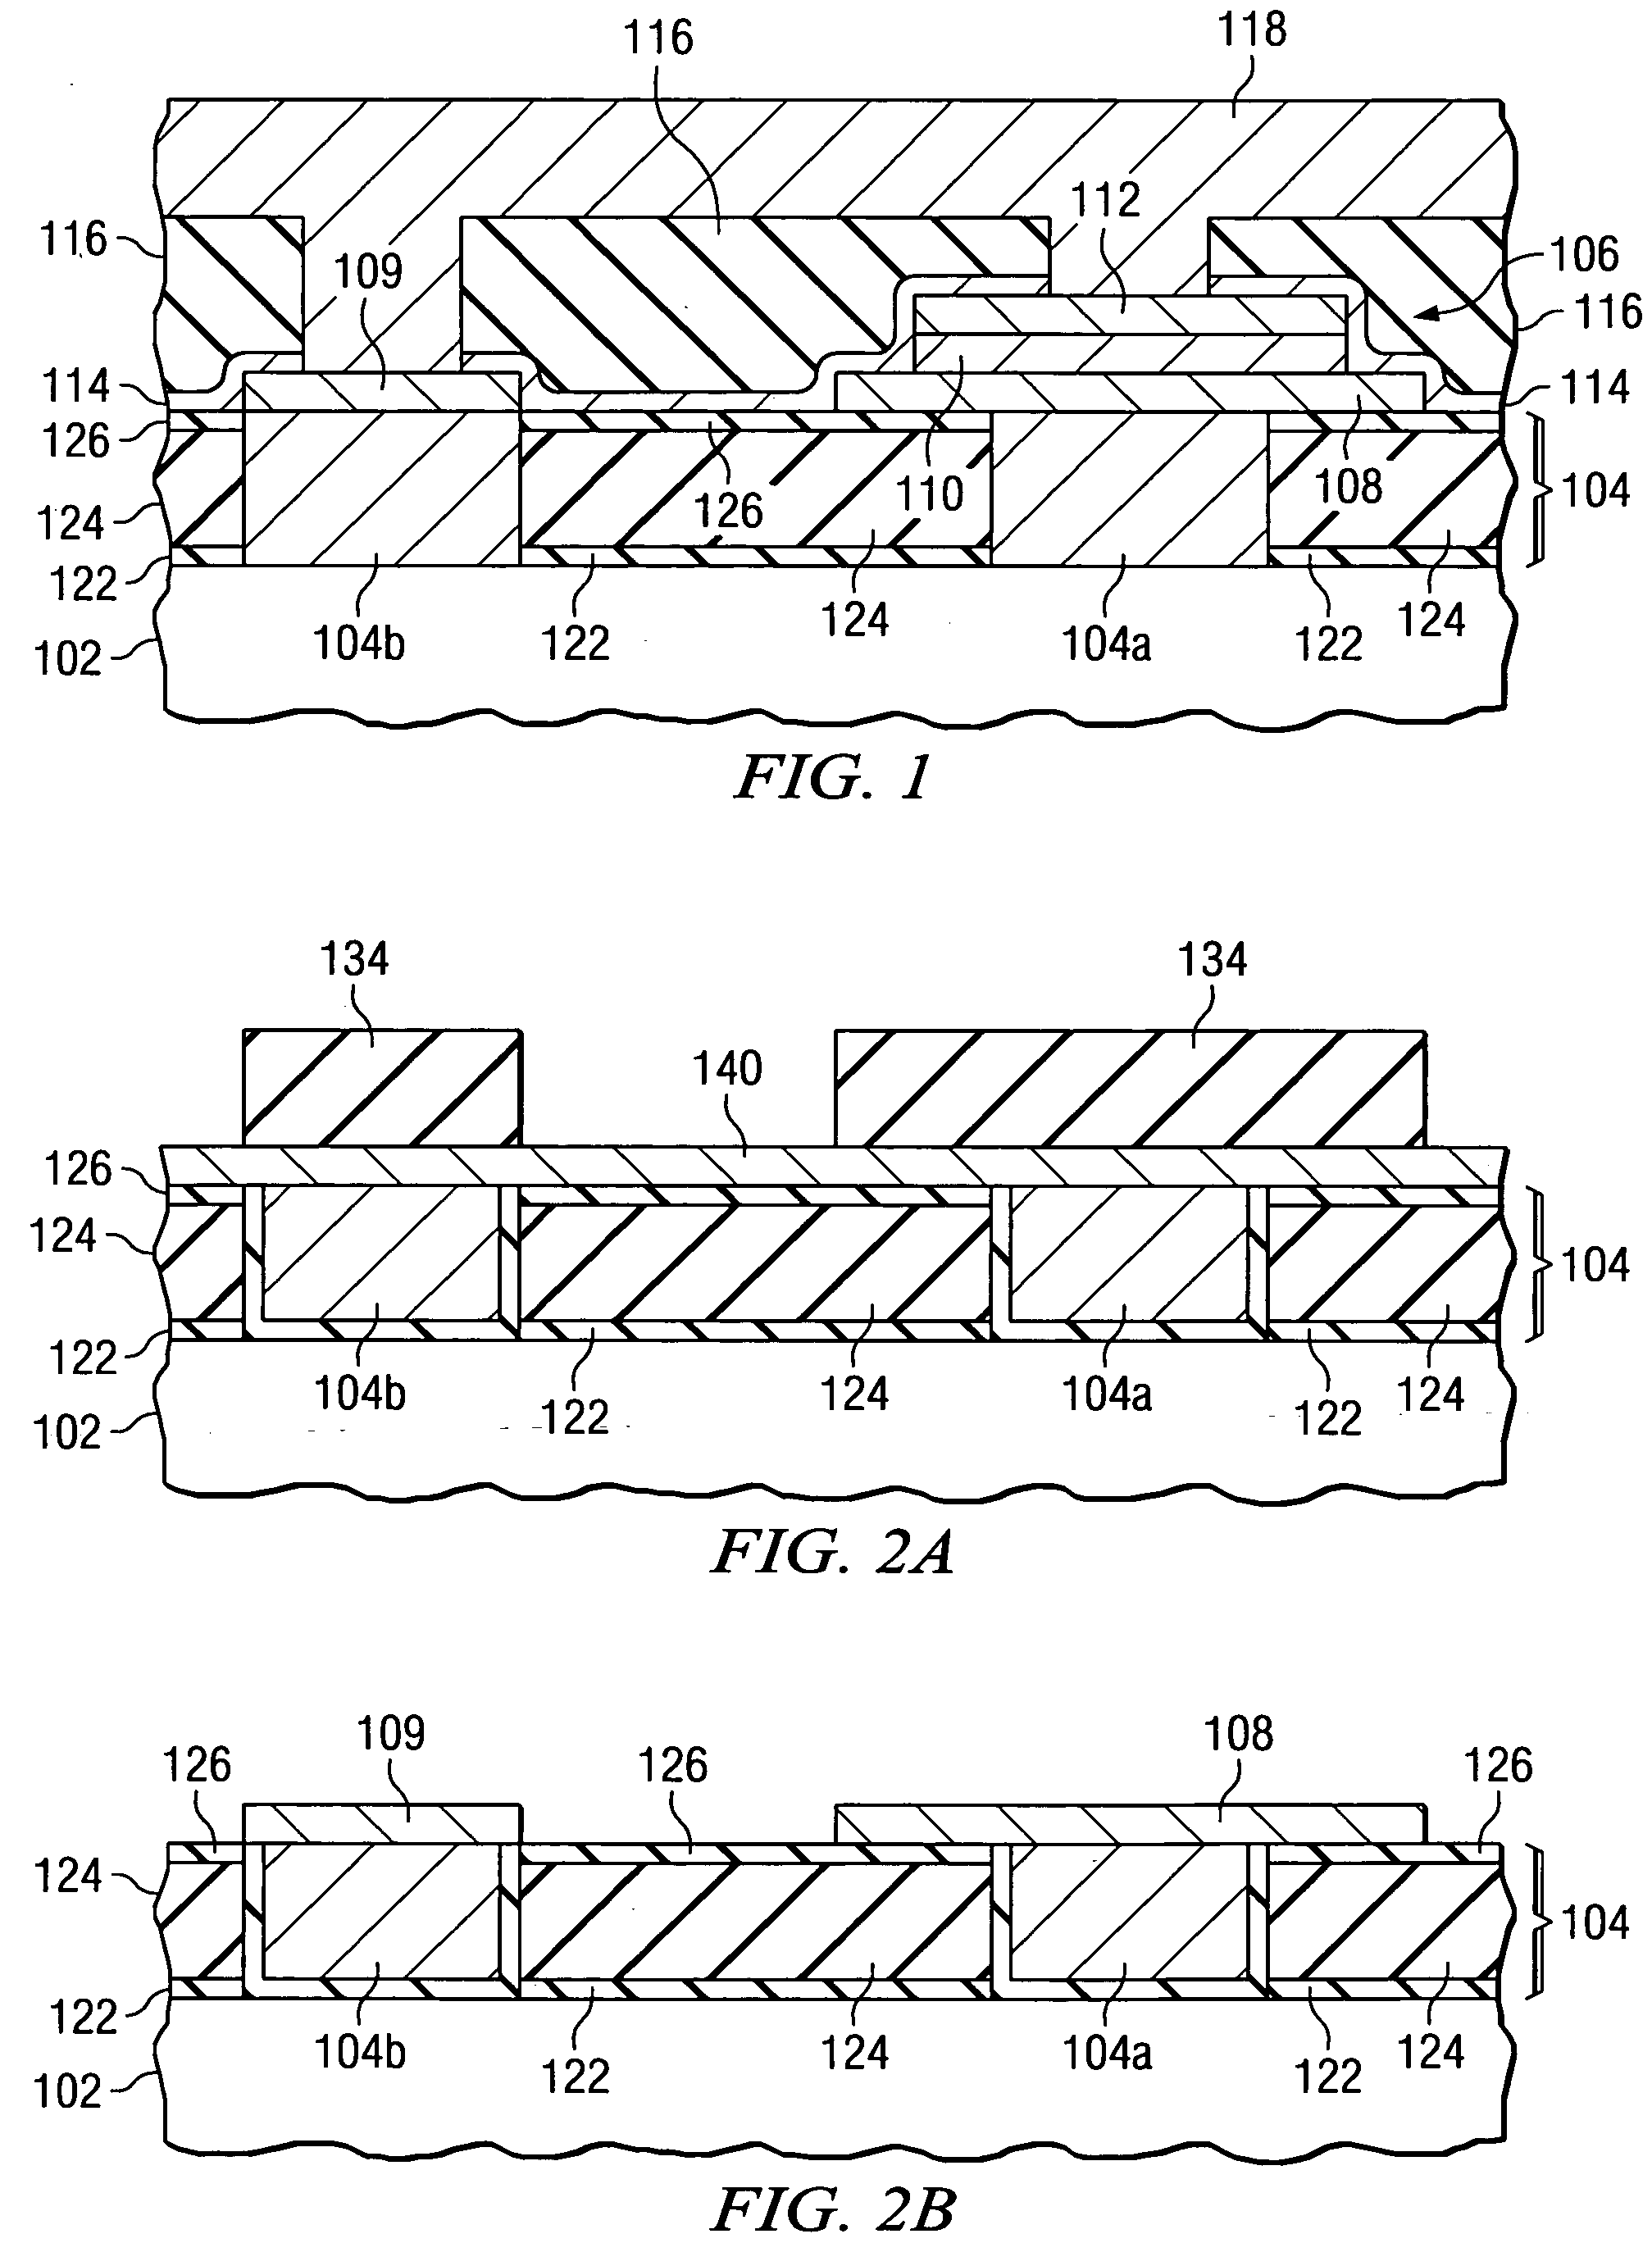 Capacitor integration at top-metal level with a protective cladding for copper surface protection